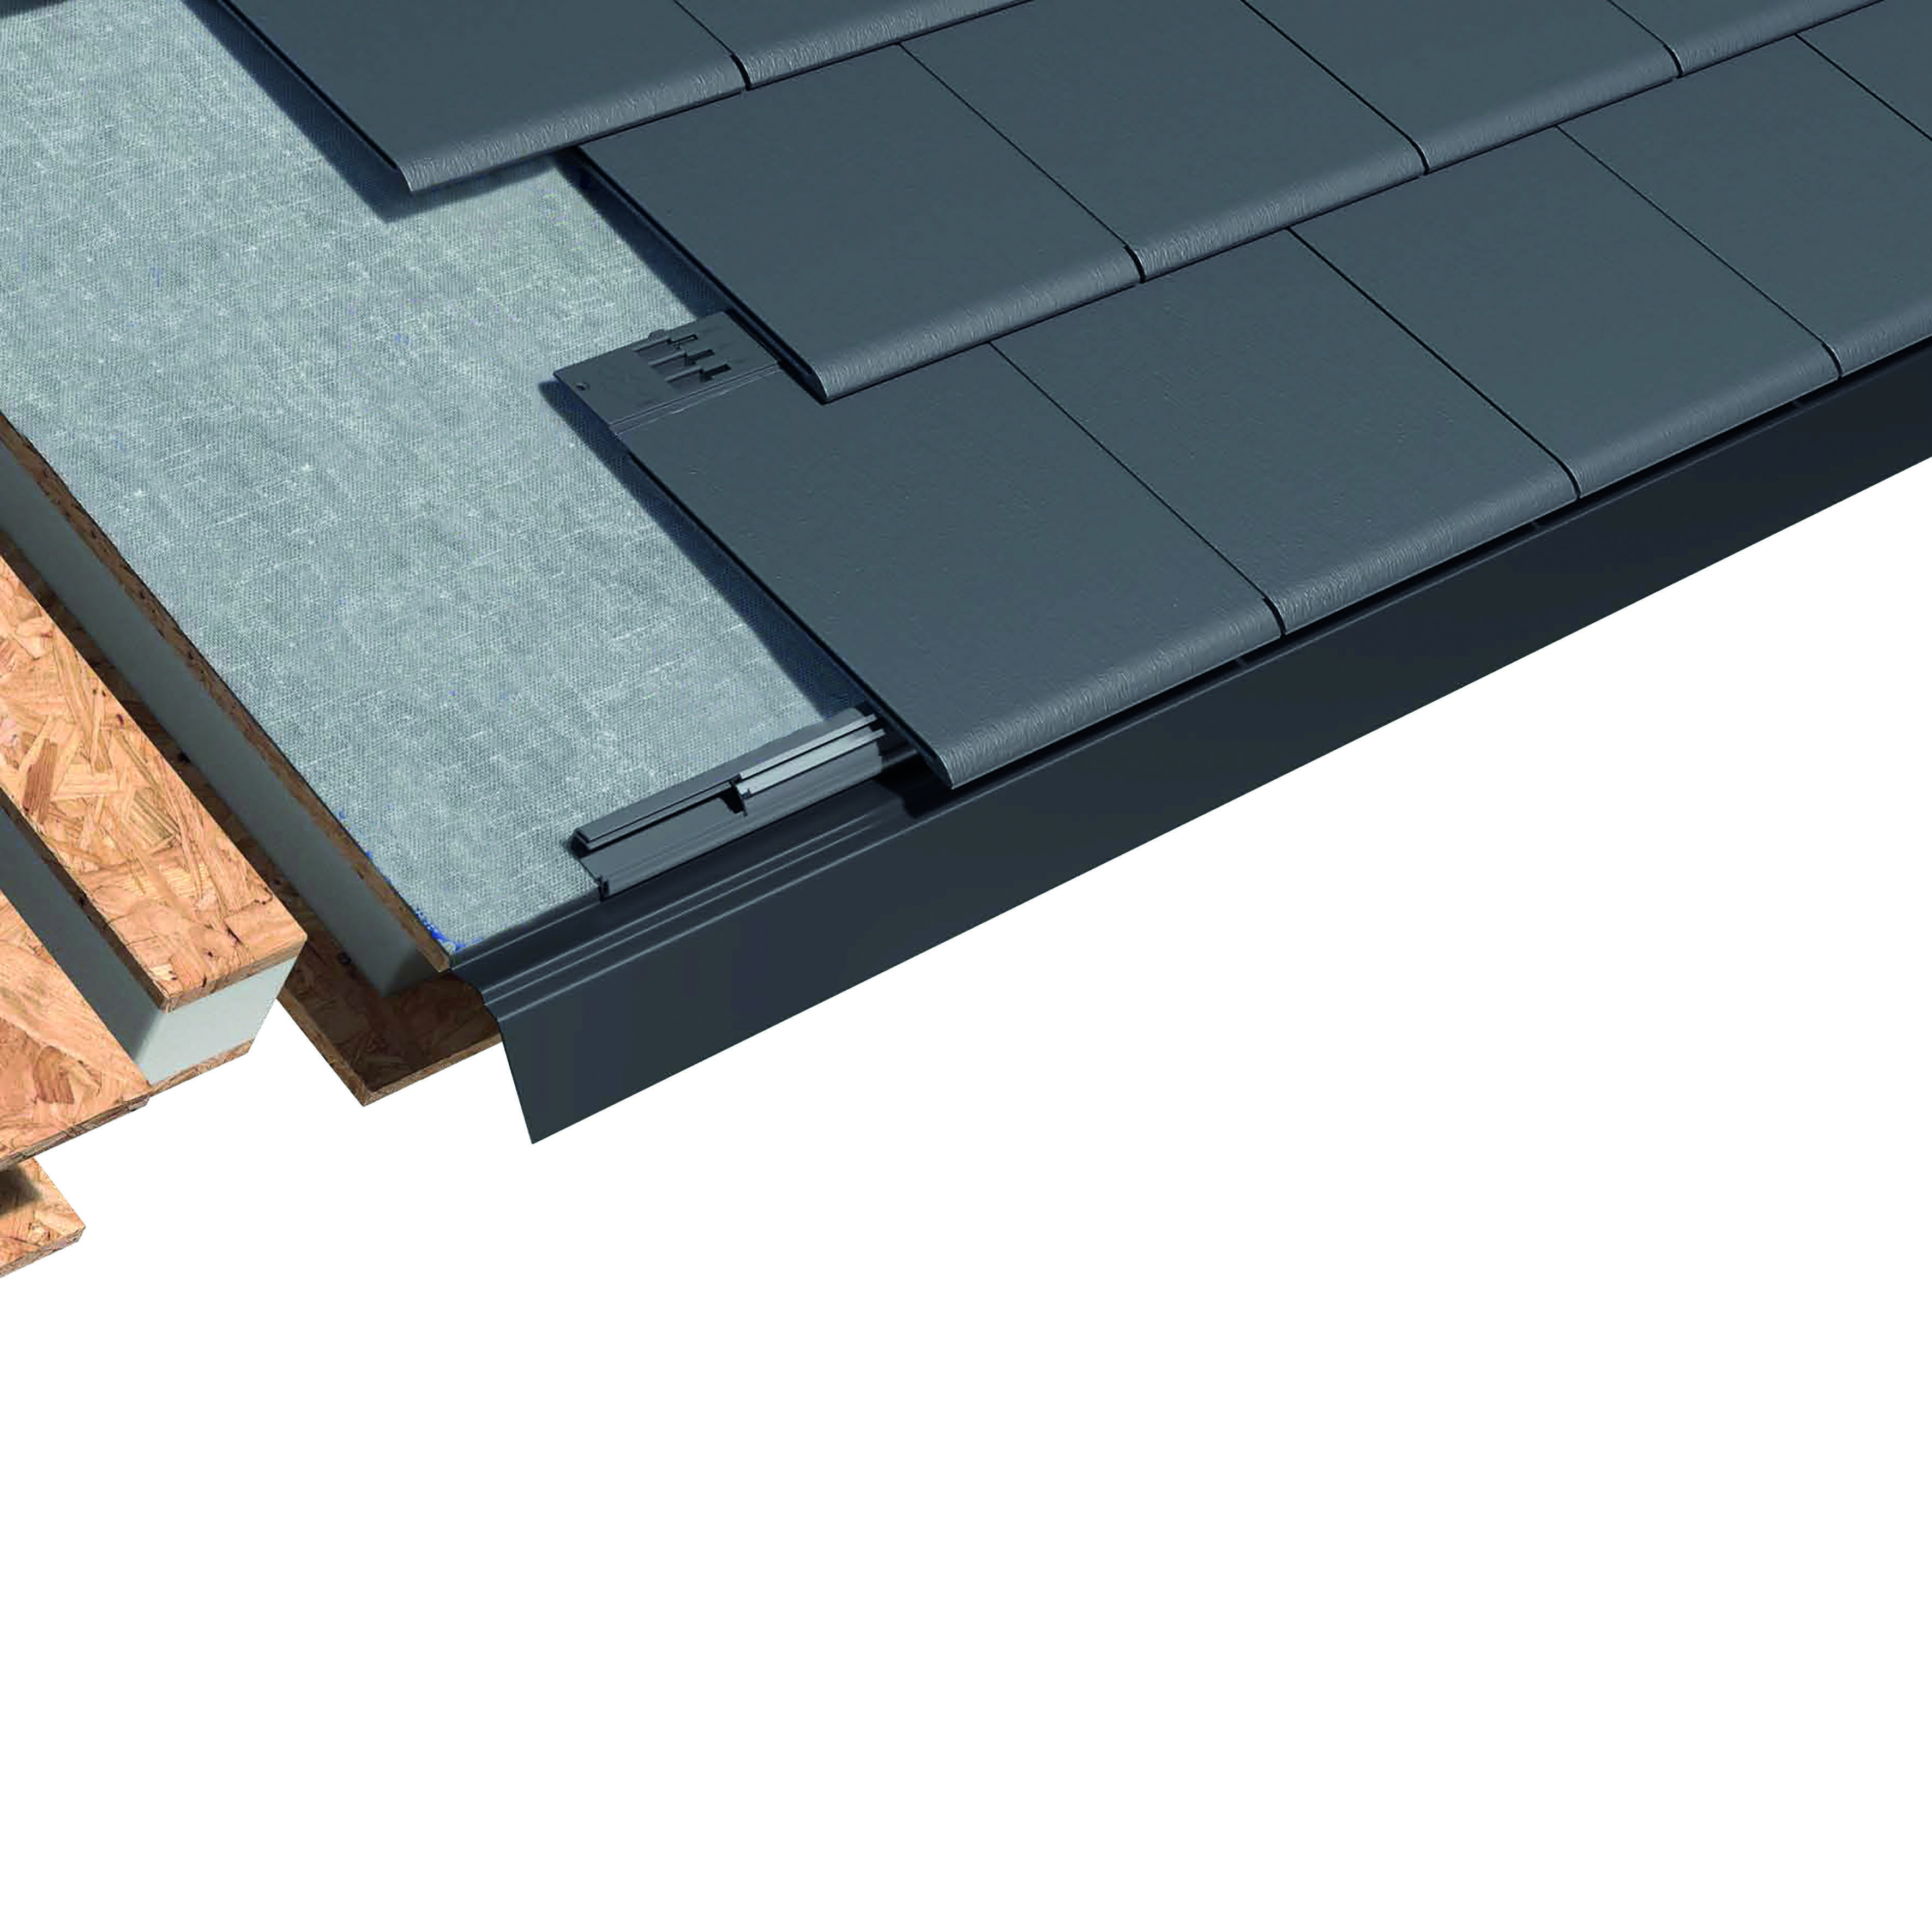 Envirotile – the lightweight, sustainable roof tile